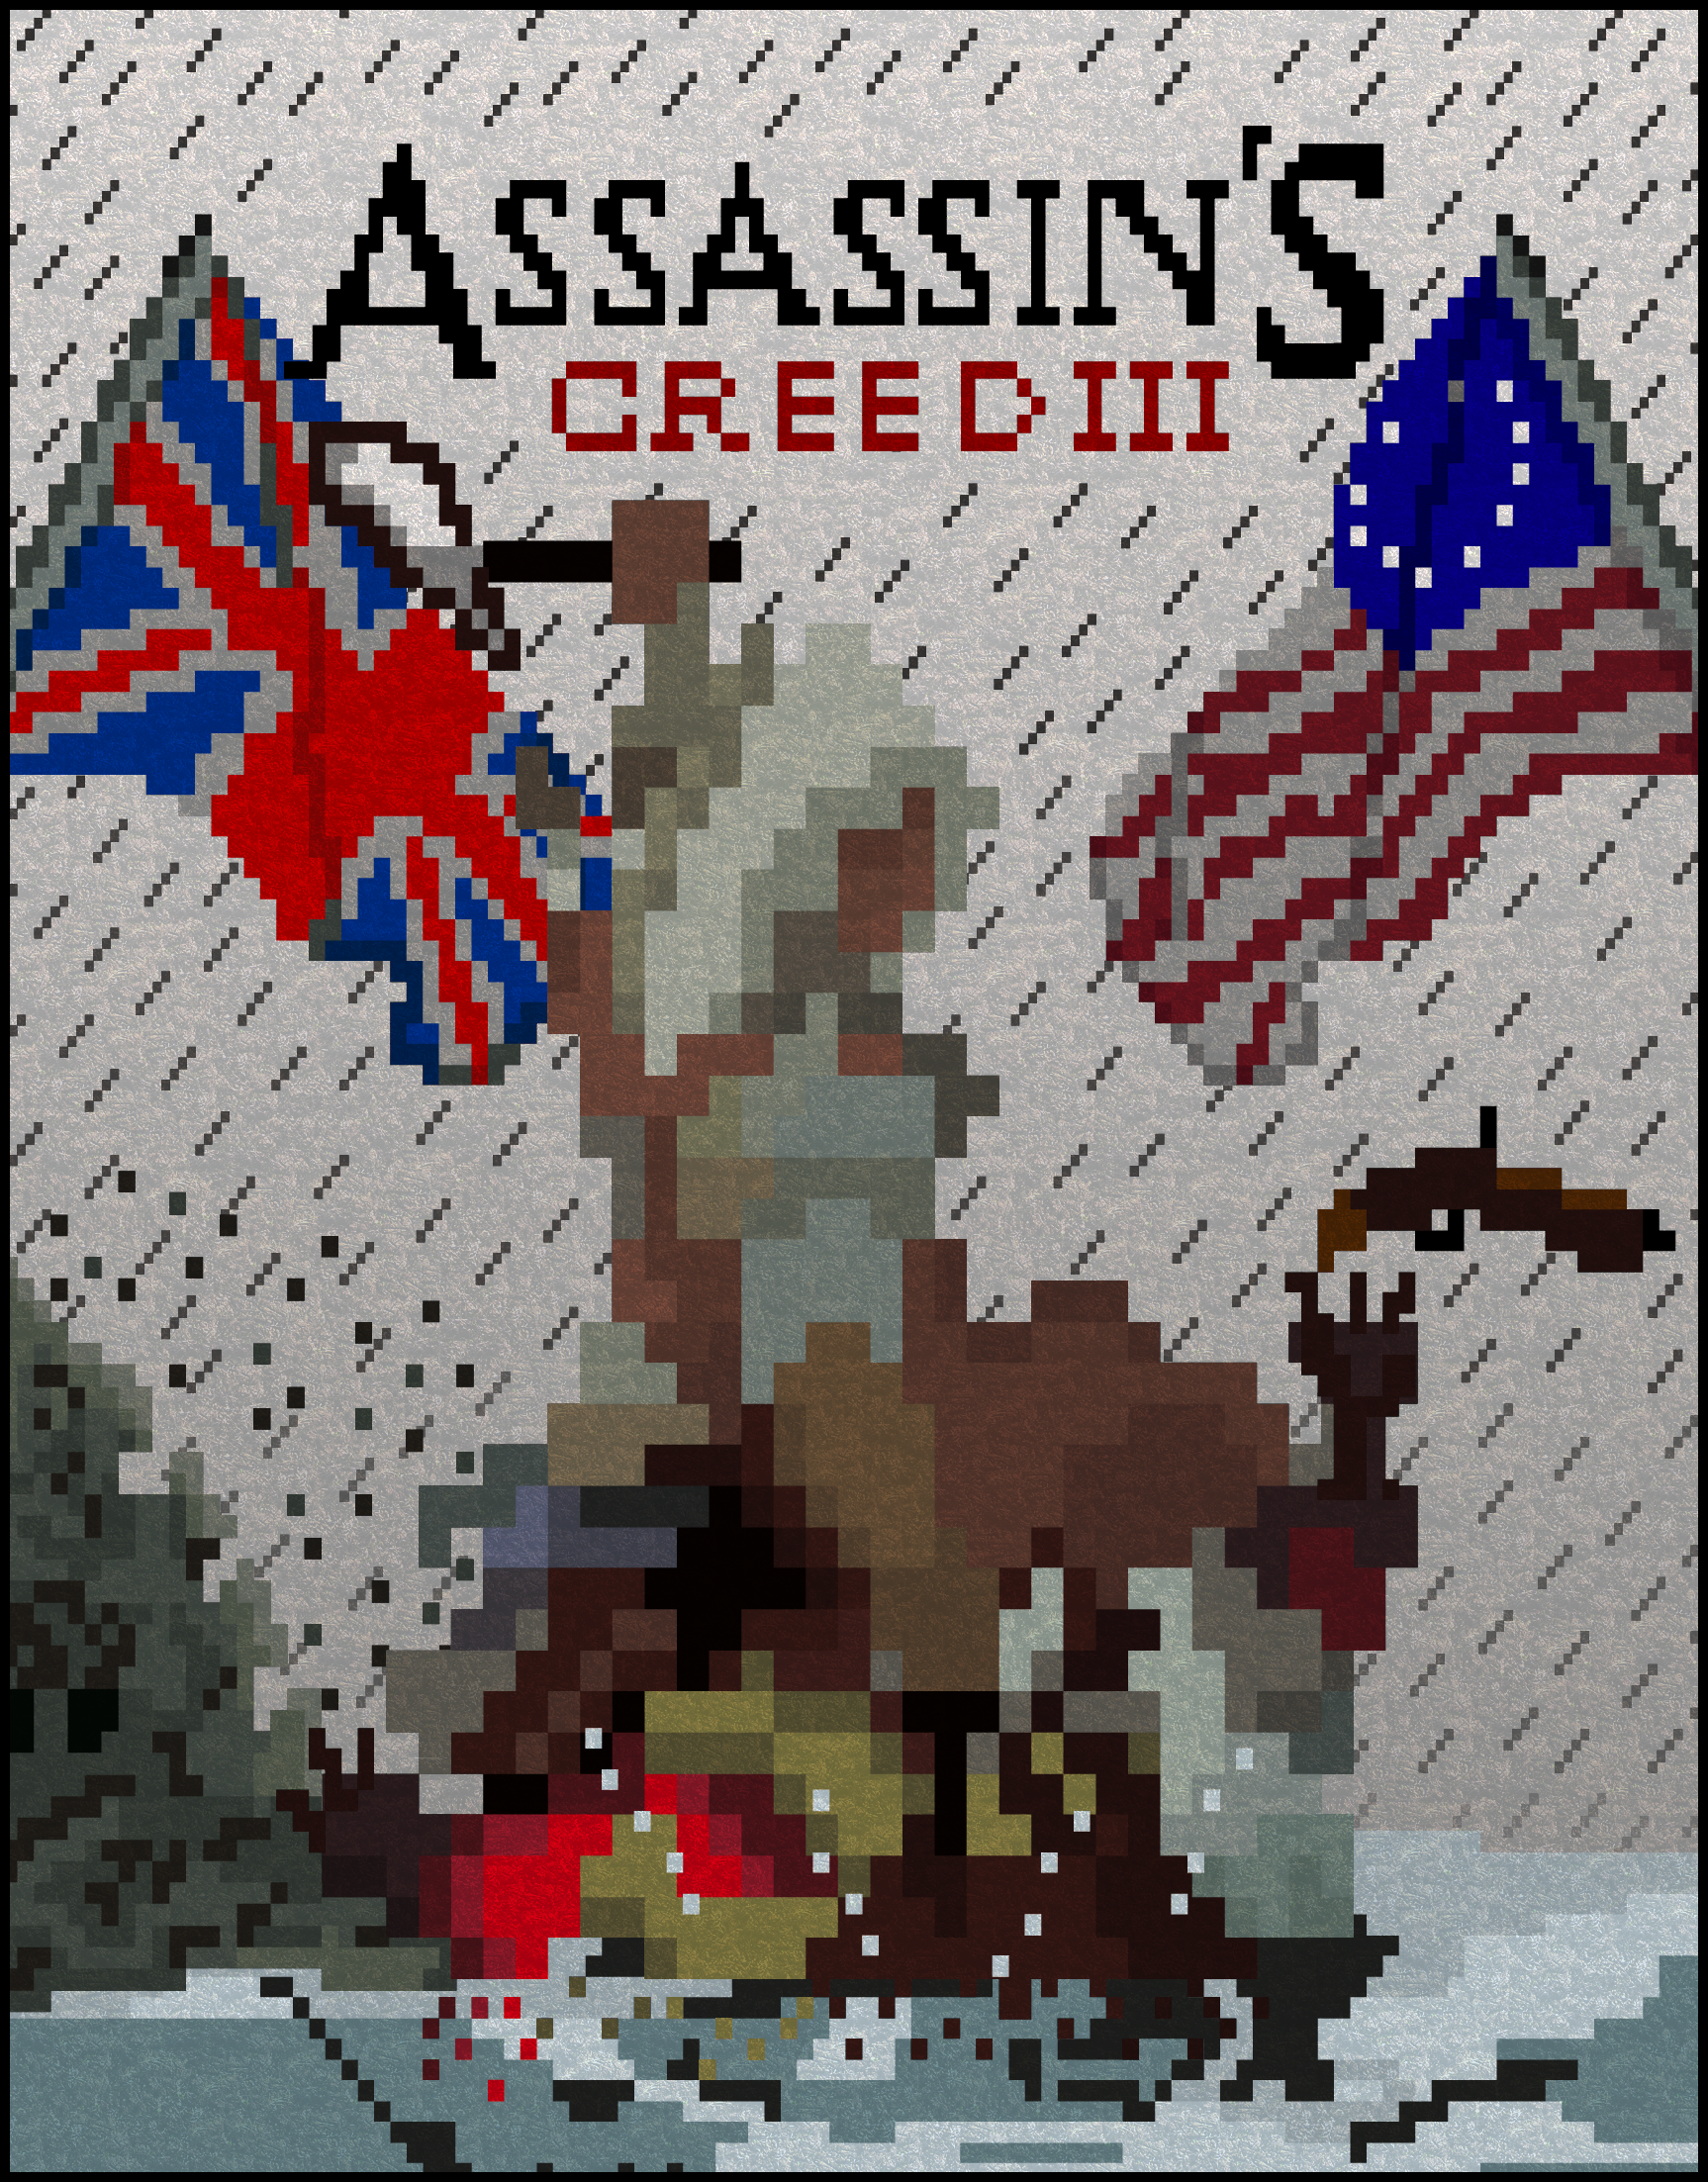 Assassin's Creed 3, NES-Style Large Poster